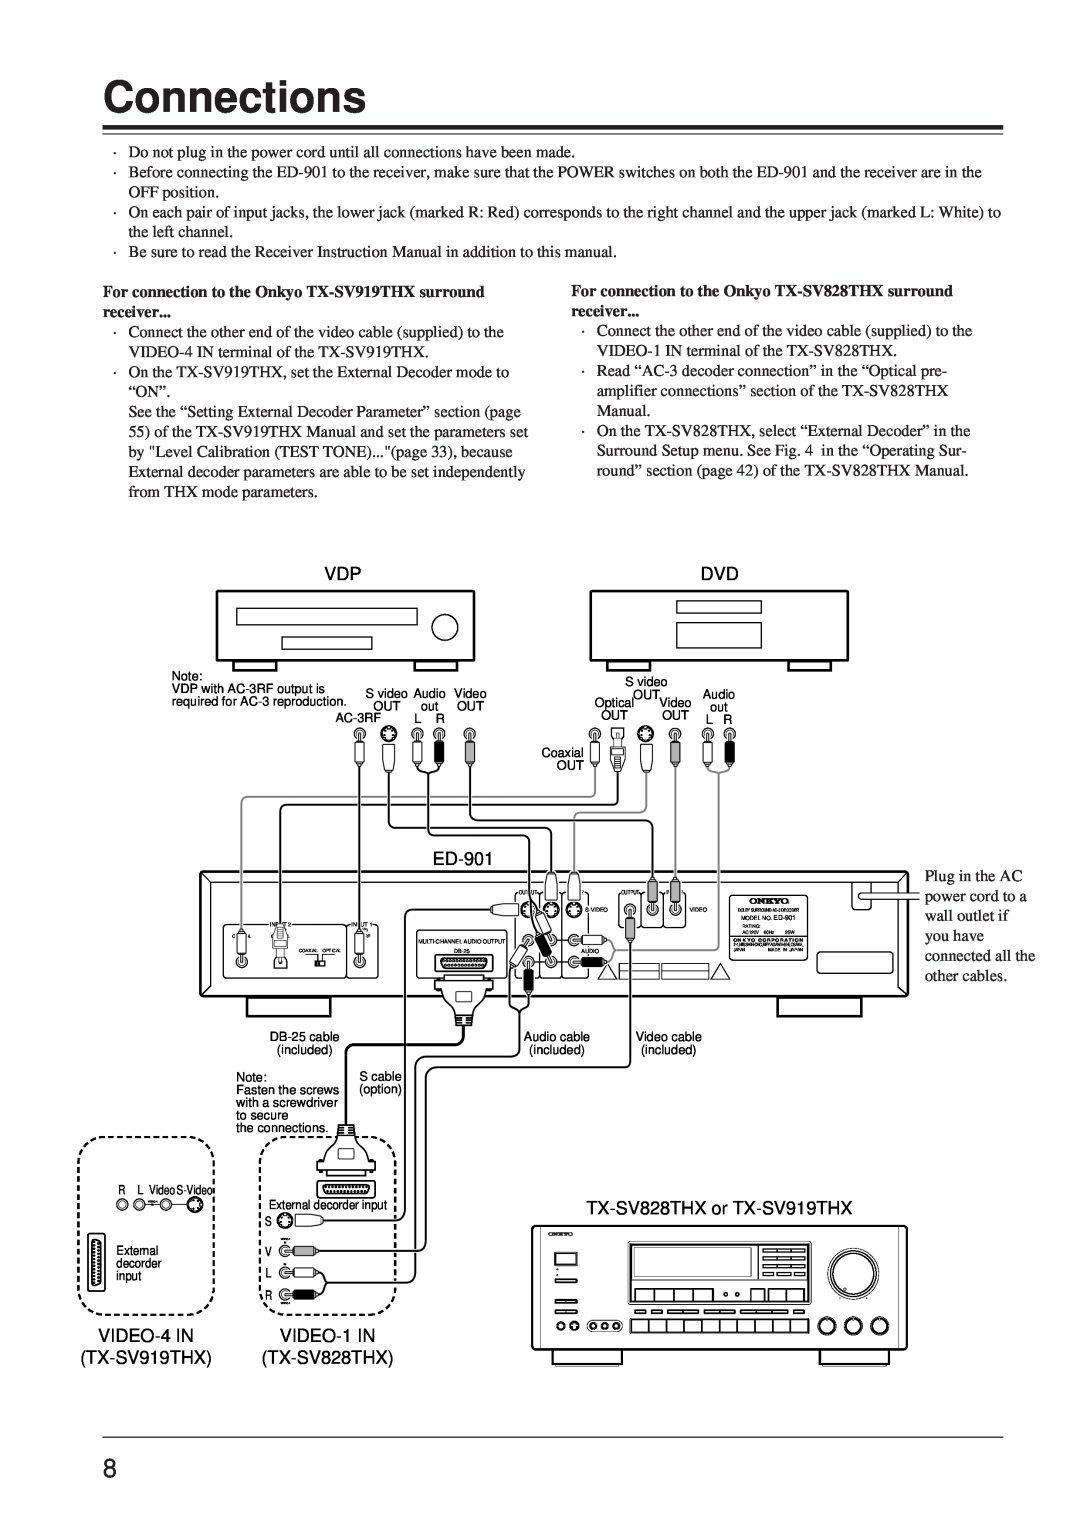 Onkyo ED-901 instruction manual Connections, VIDEO-4IN, VIDEO-1IN, TX-SV828THXor TX-SV919THX, receiver 